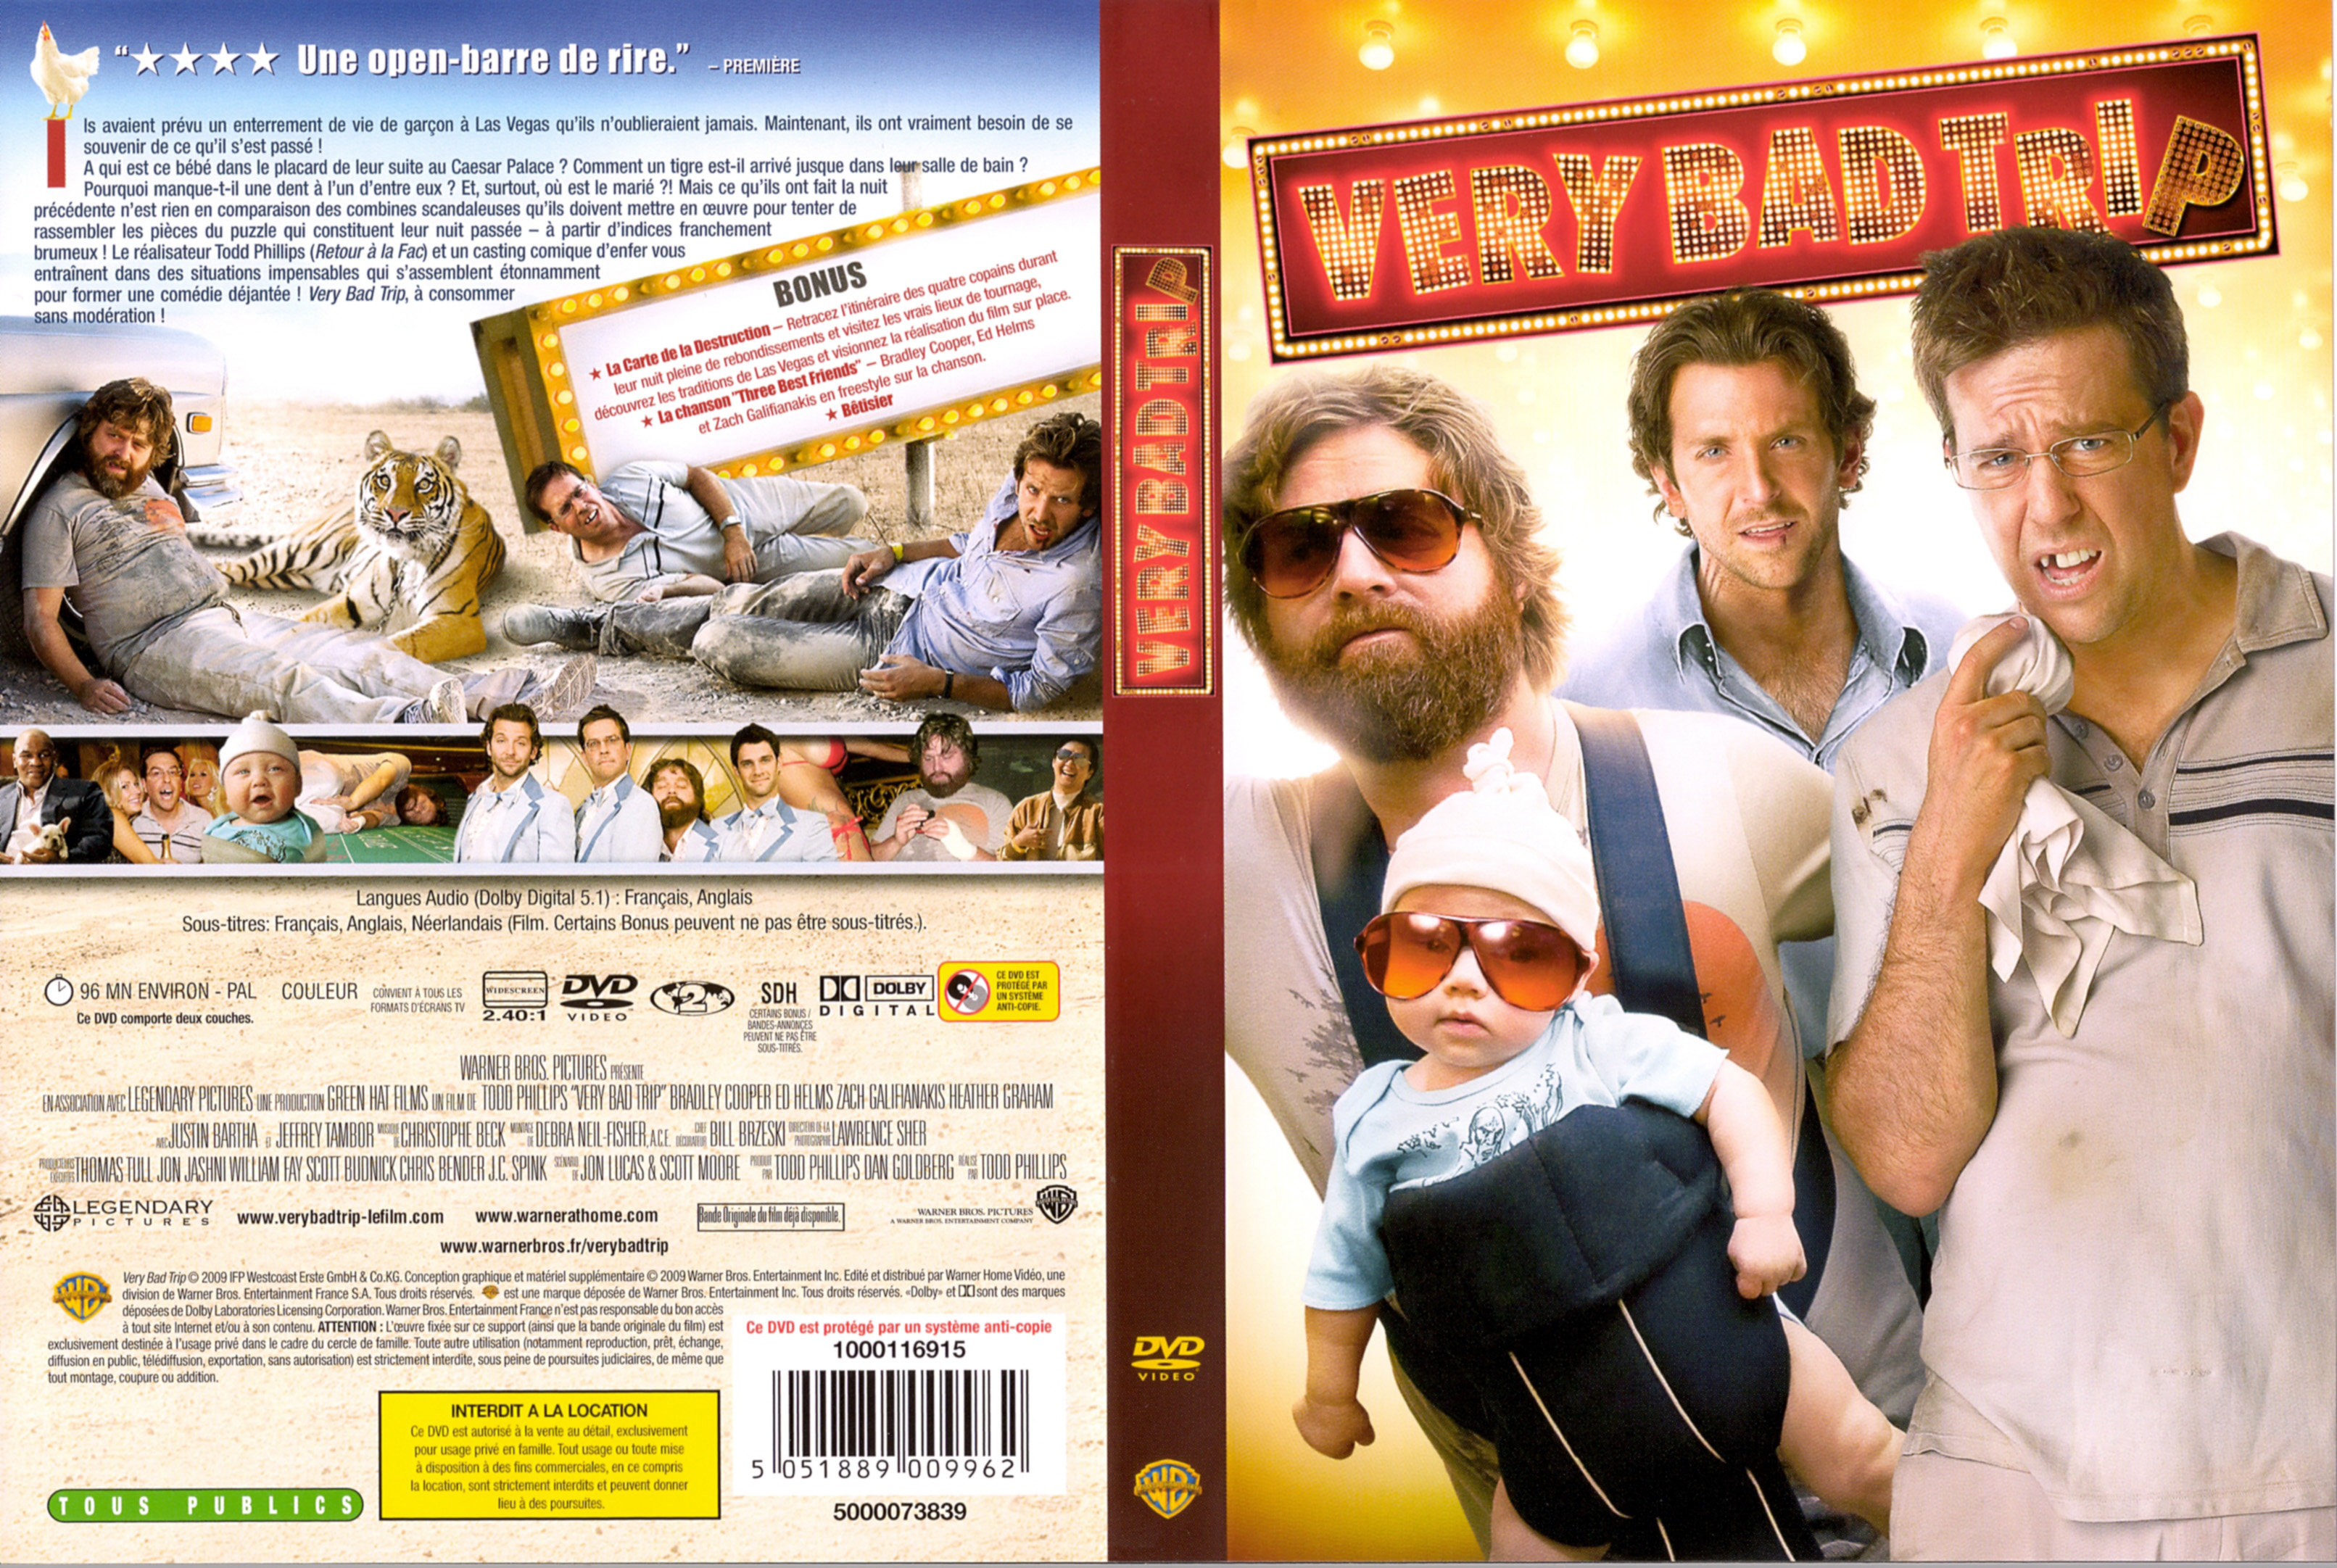 Jaquette DVD Very Bad Trip